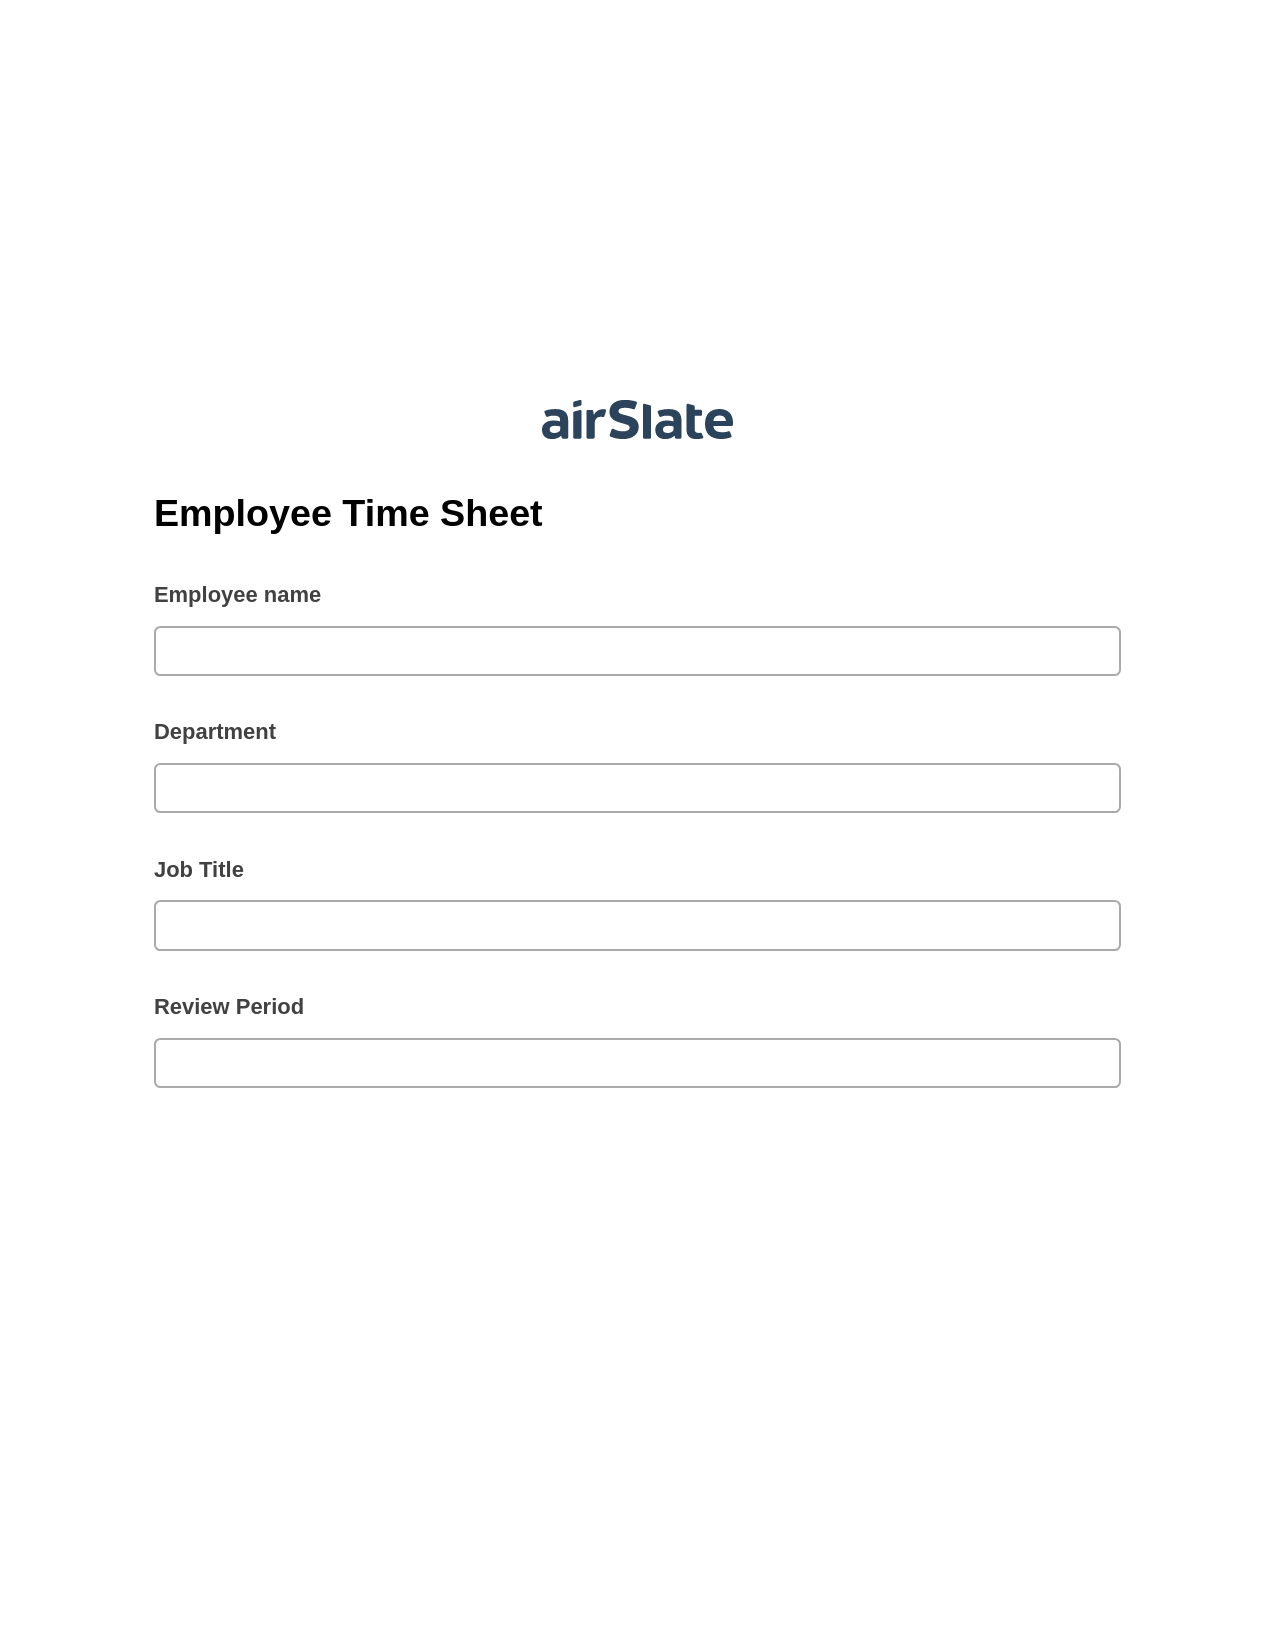 Employee Time Sheet Pre-fill Document Bot, Update Audit Trail Bot, Archive to SharePoint Folder Bot